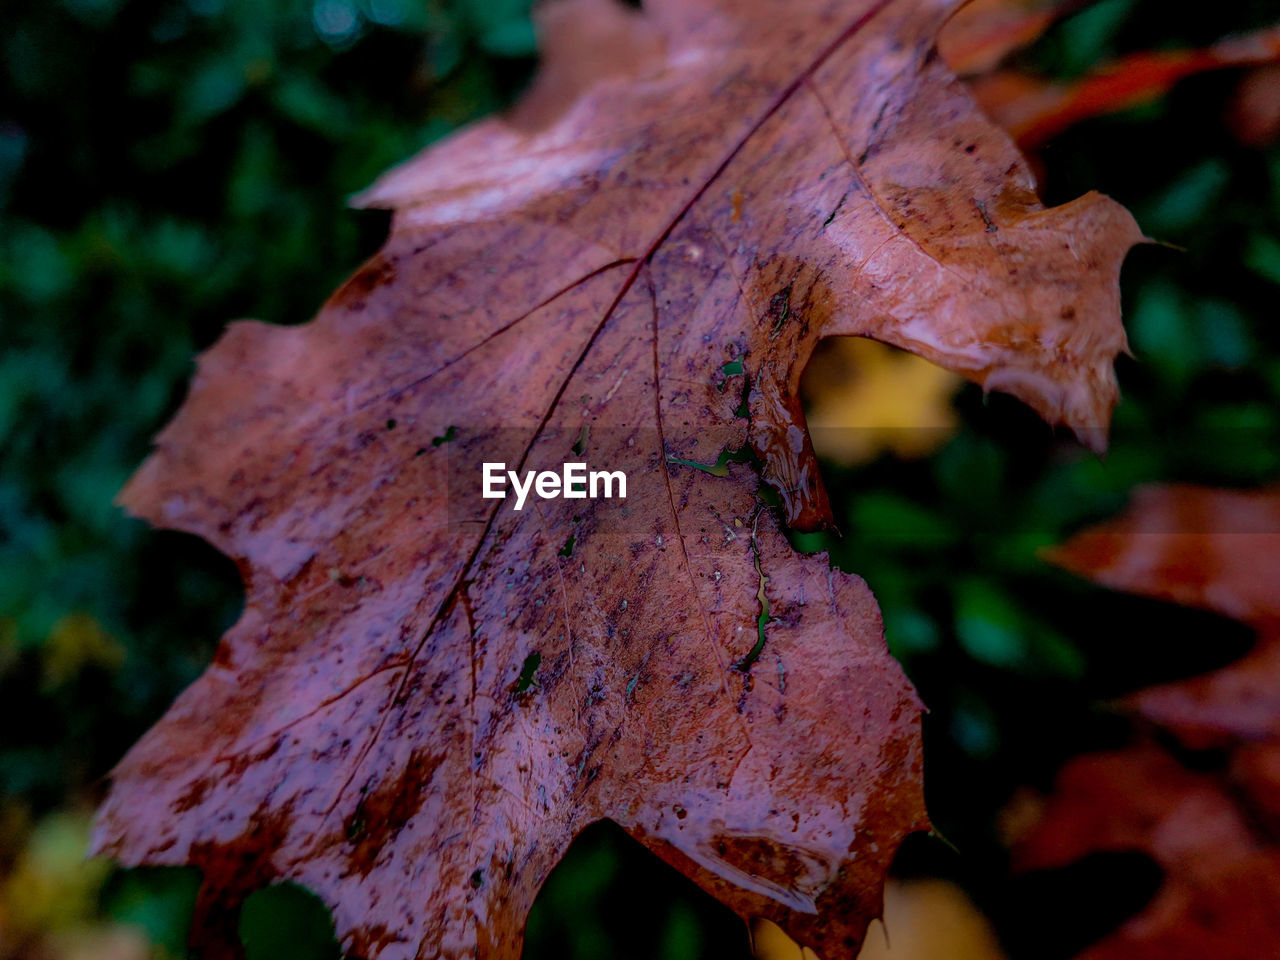 tree, leaf, plant part, nature, plant, autumn, close-up, dry, no people, beauty in nature, macro photography, land, focus on foreground, maple leaf, leaf vein, outdoors, day, flower, fragility, brown, pattern, branch, forest, soil, tranquility, environment, maple